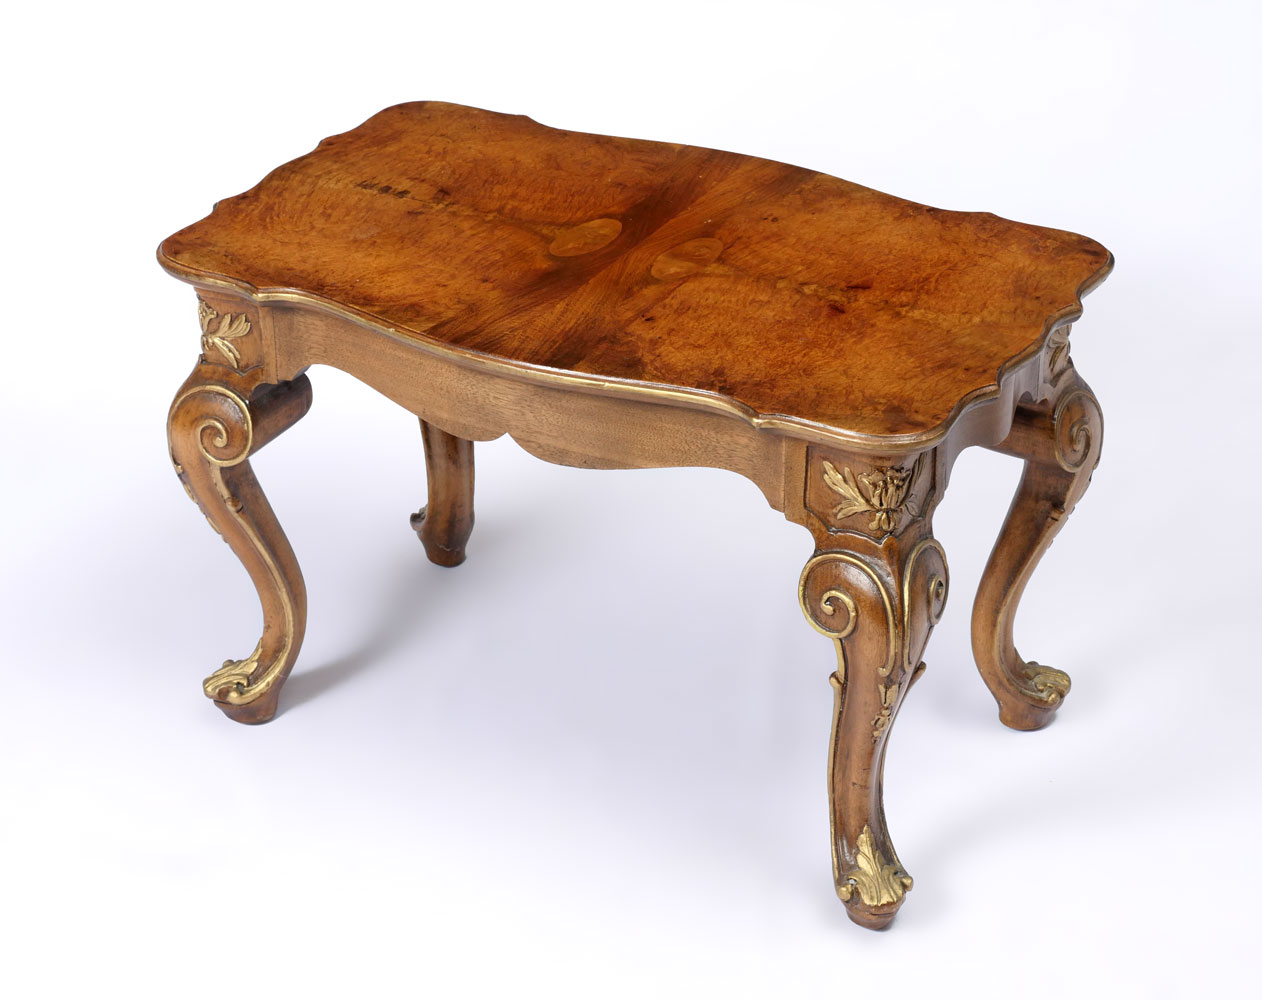 CARVED BURL WOOD TABLE: Book match